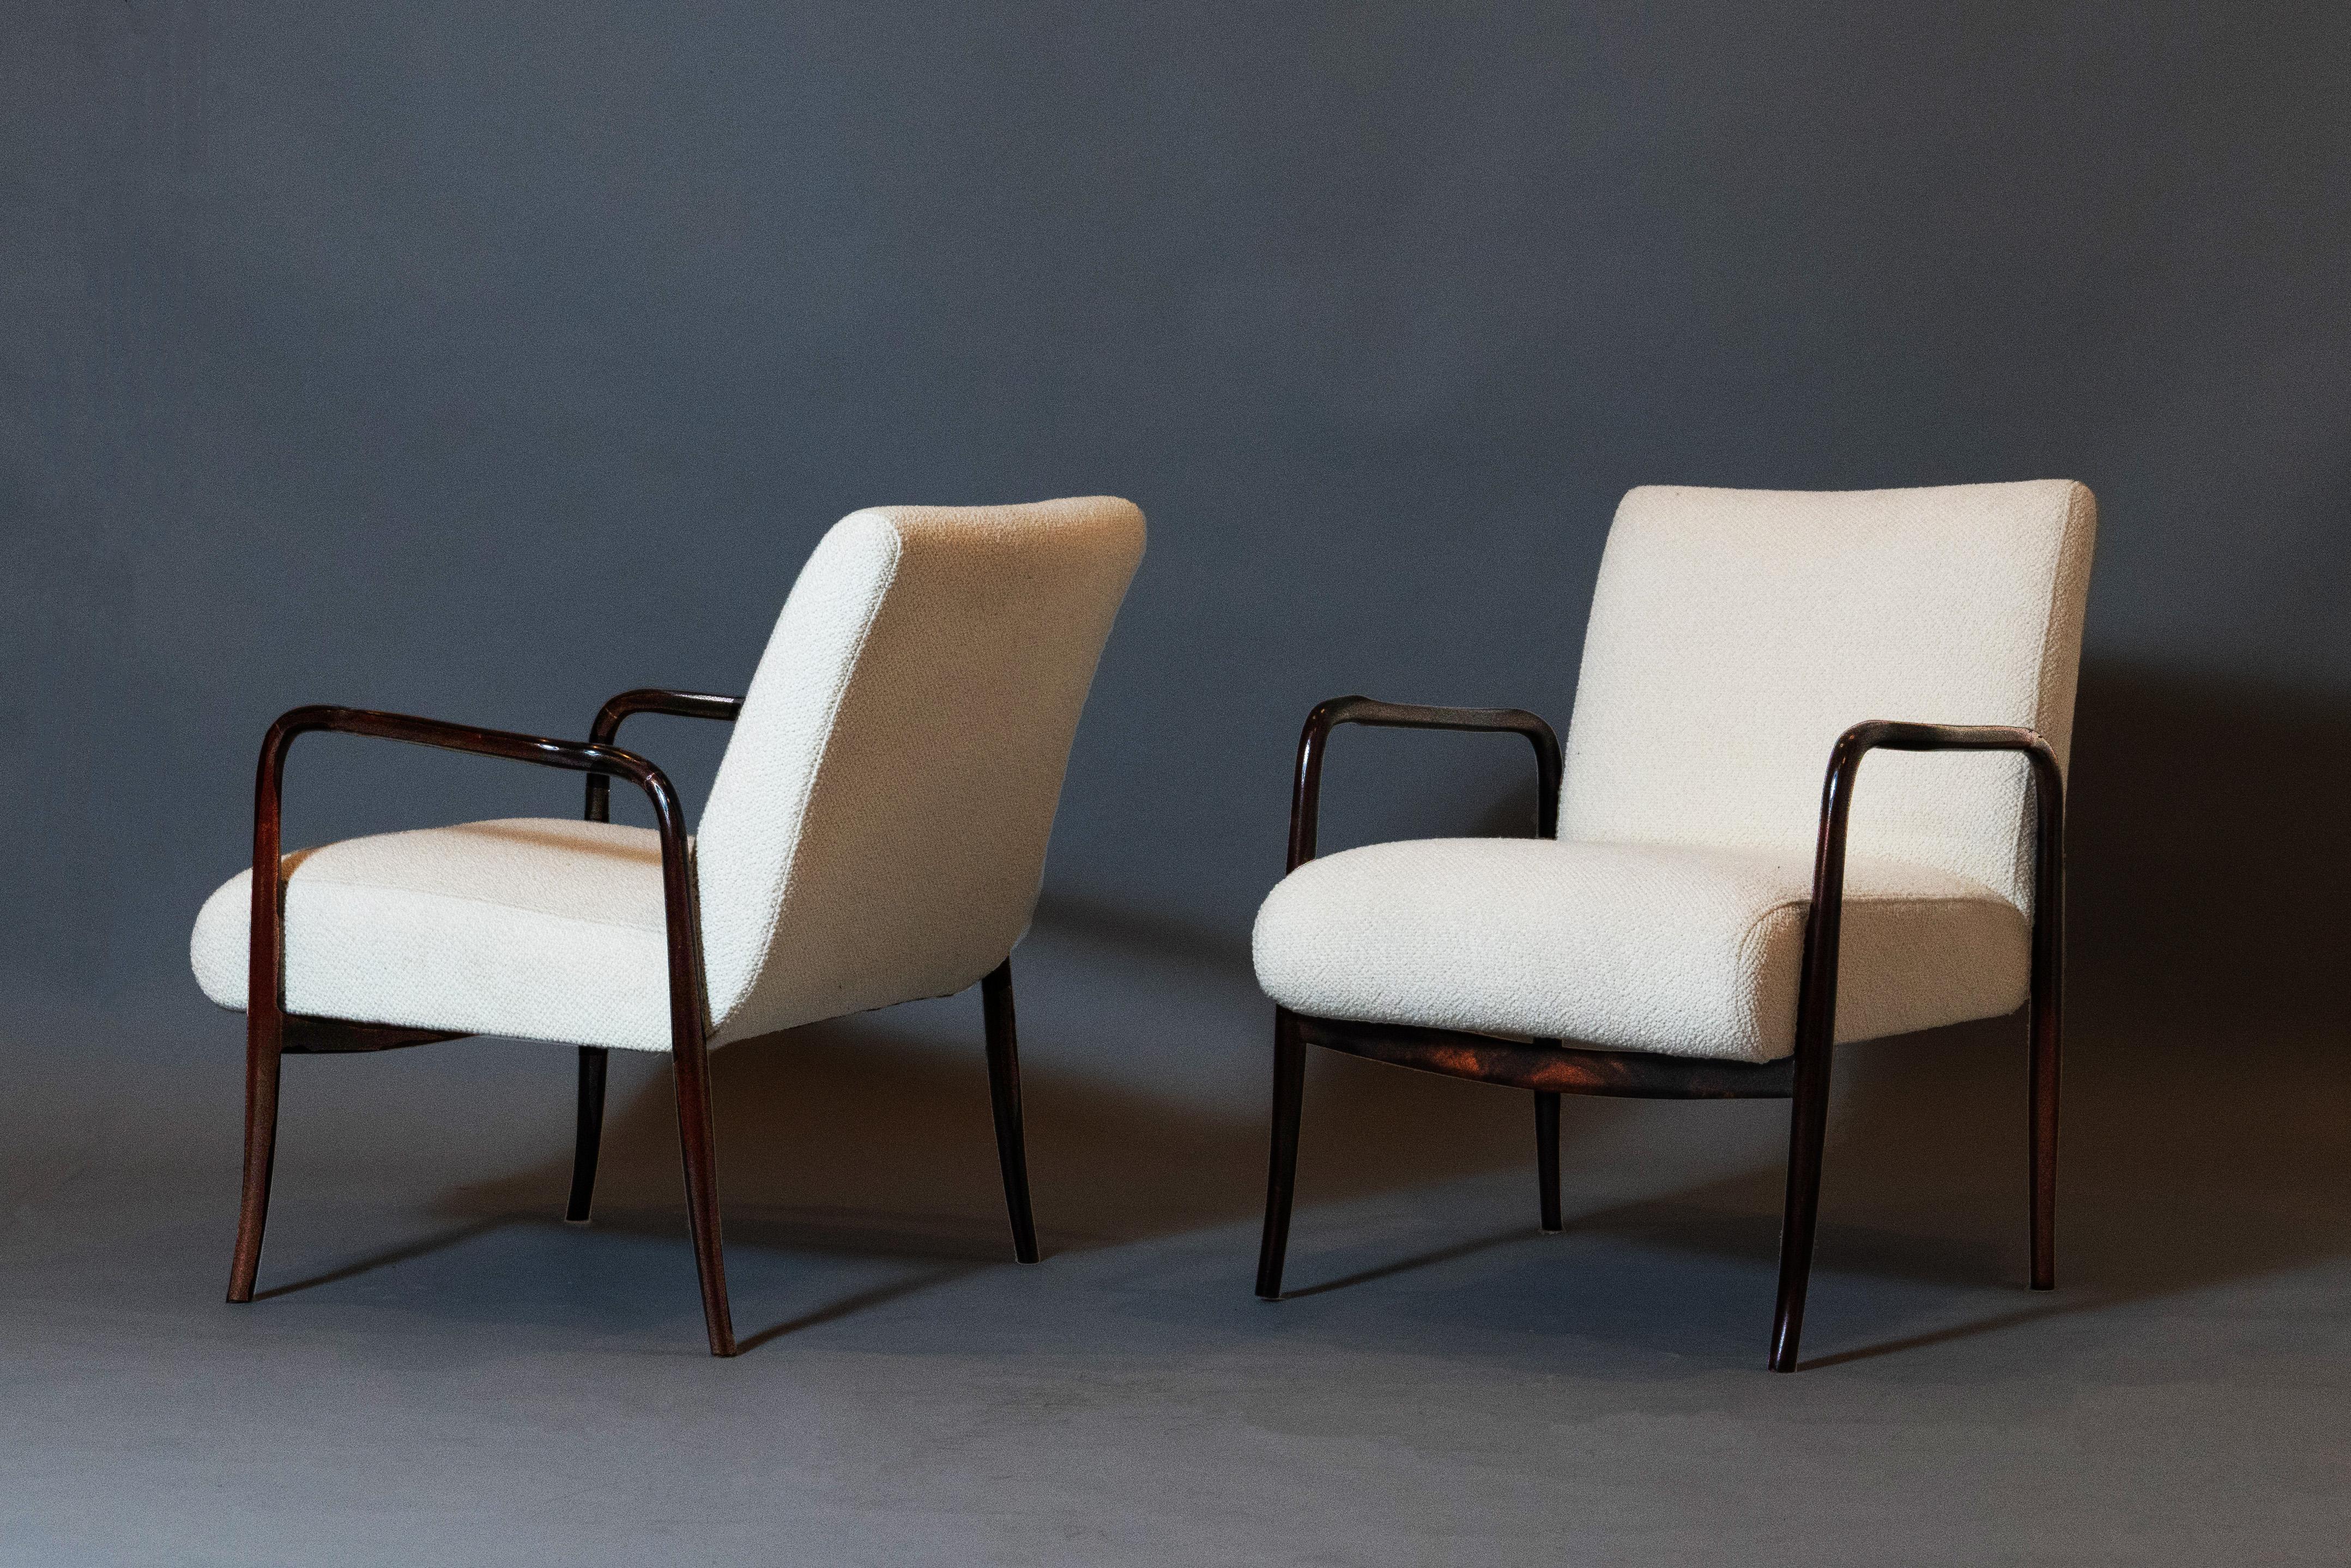 Joaquim Tenreiro (1906 - 1992) 

A stunning pair of armchairs of exceptional lightness and elegance, in jacaranda, by pioneer of Brazilian modernism Joaquim Tenreiro.

Brazil, 1942.   

Chairs are priced individually and sold as a pair. 